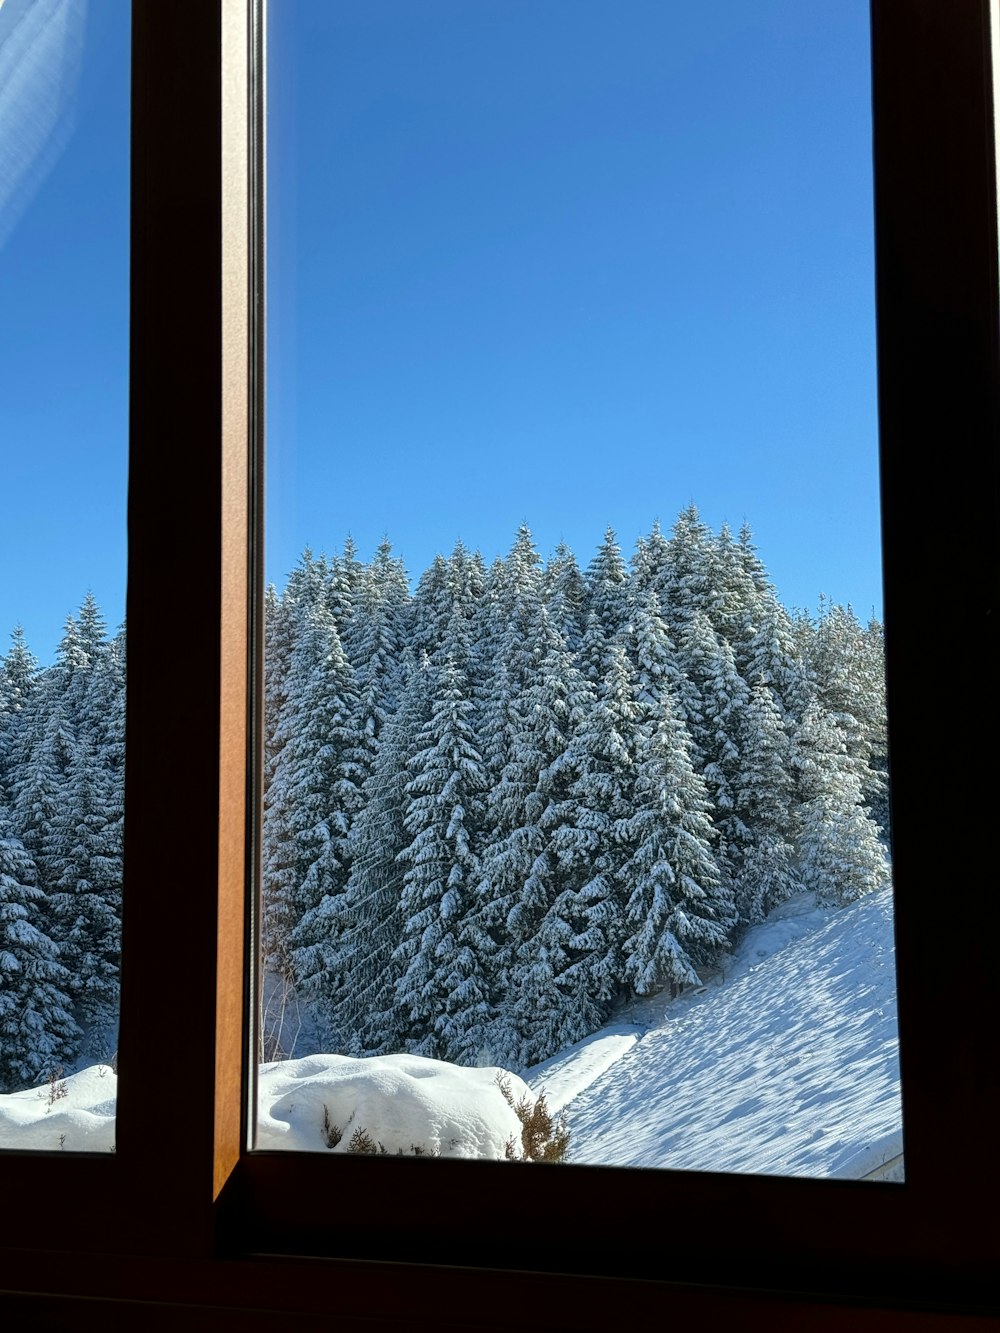 a view out a window of a snowy forest